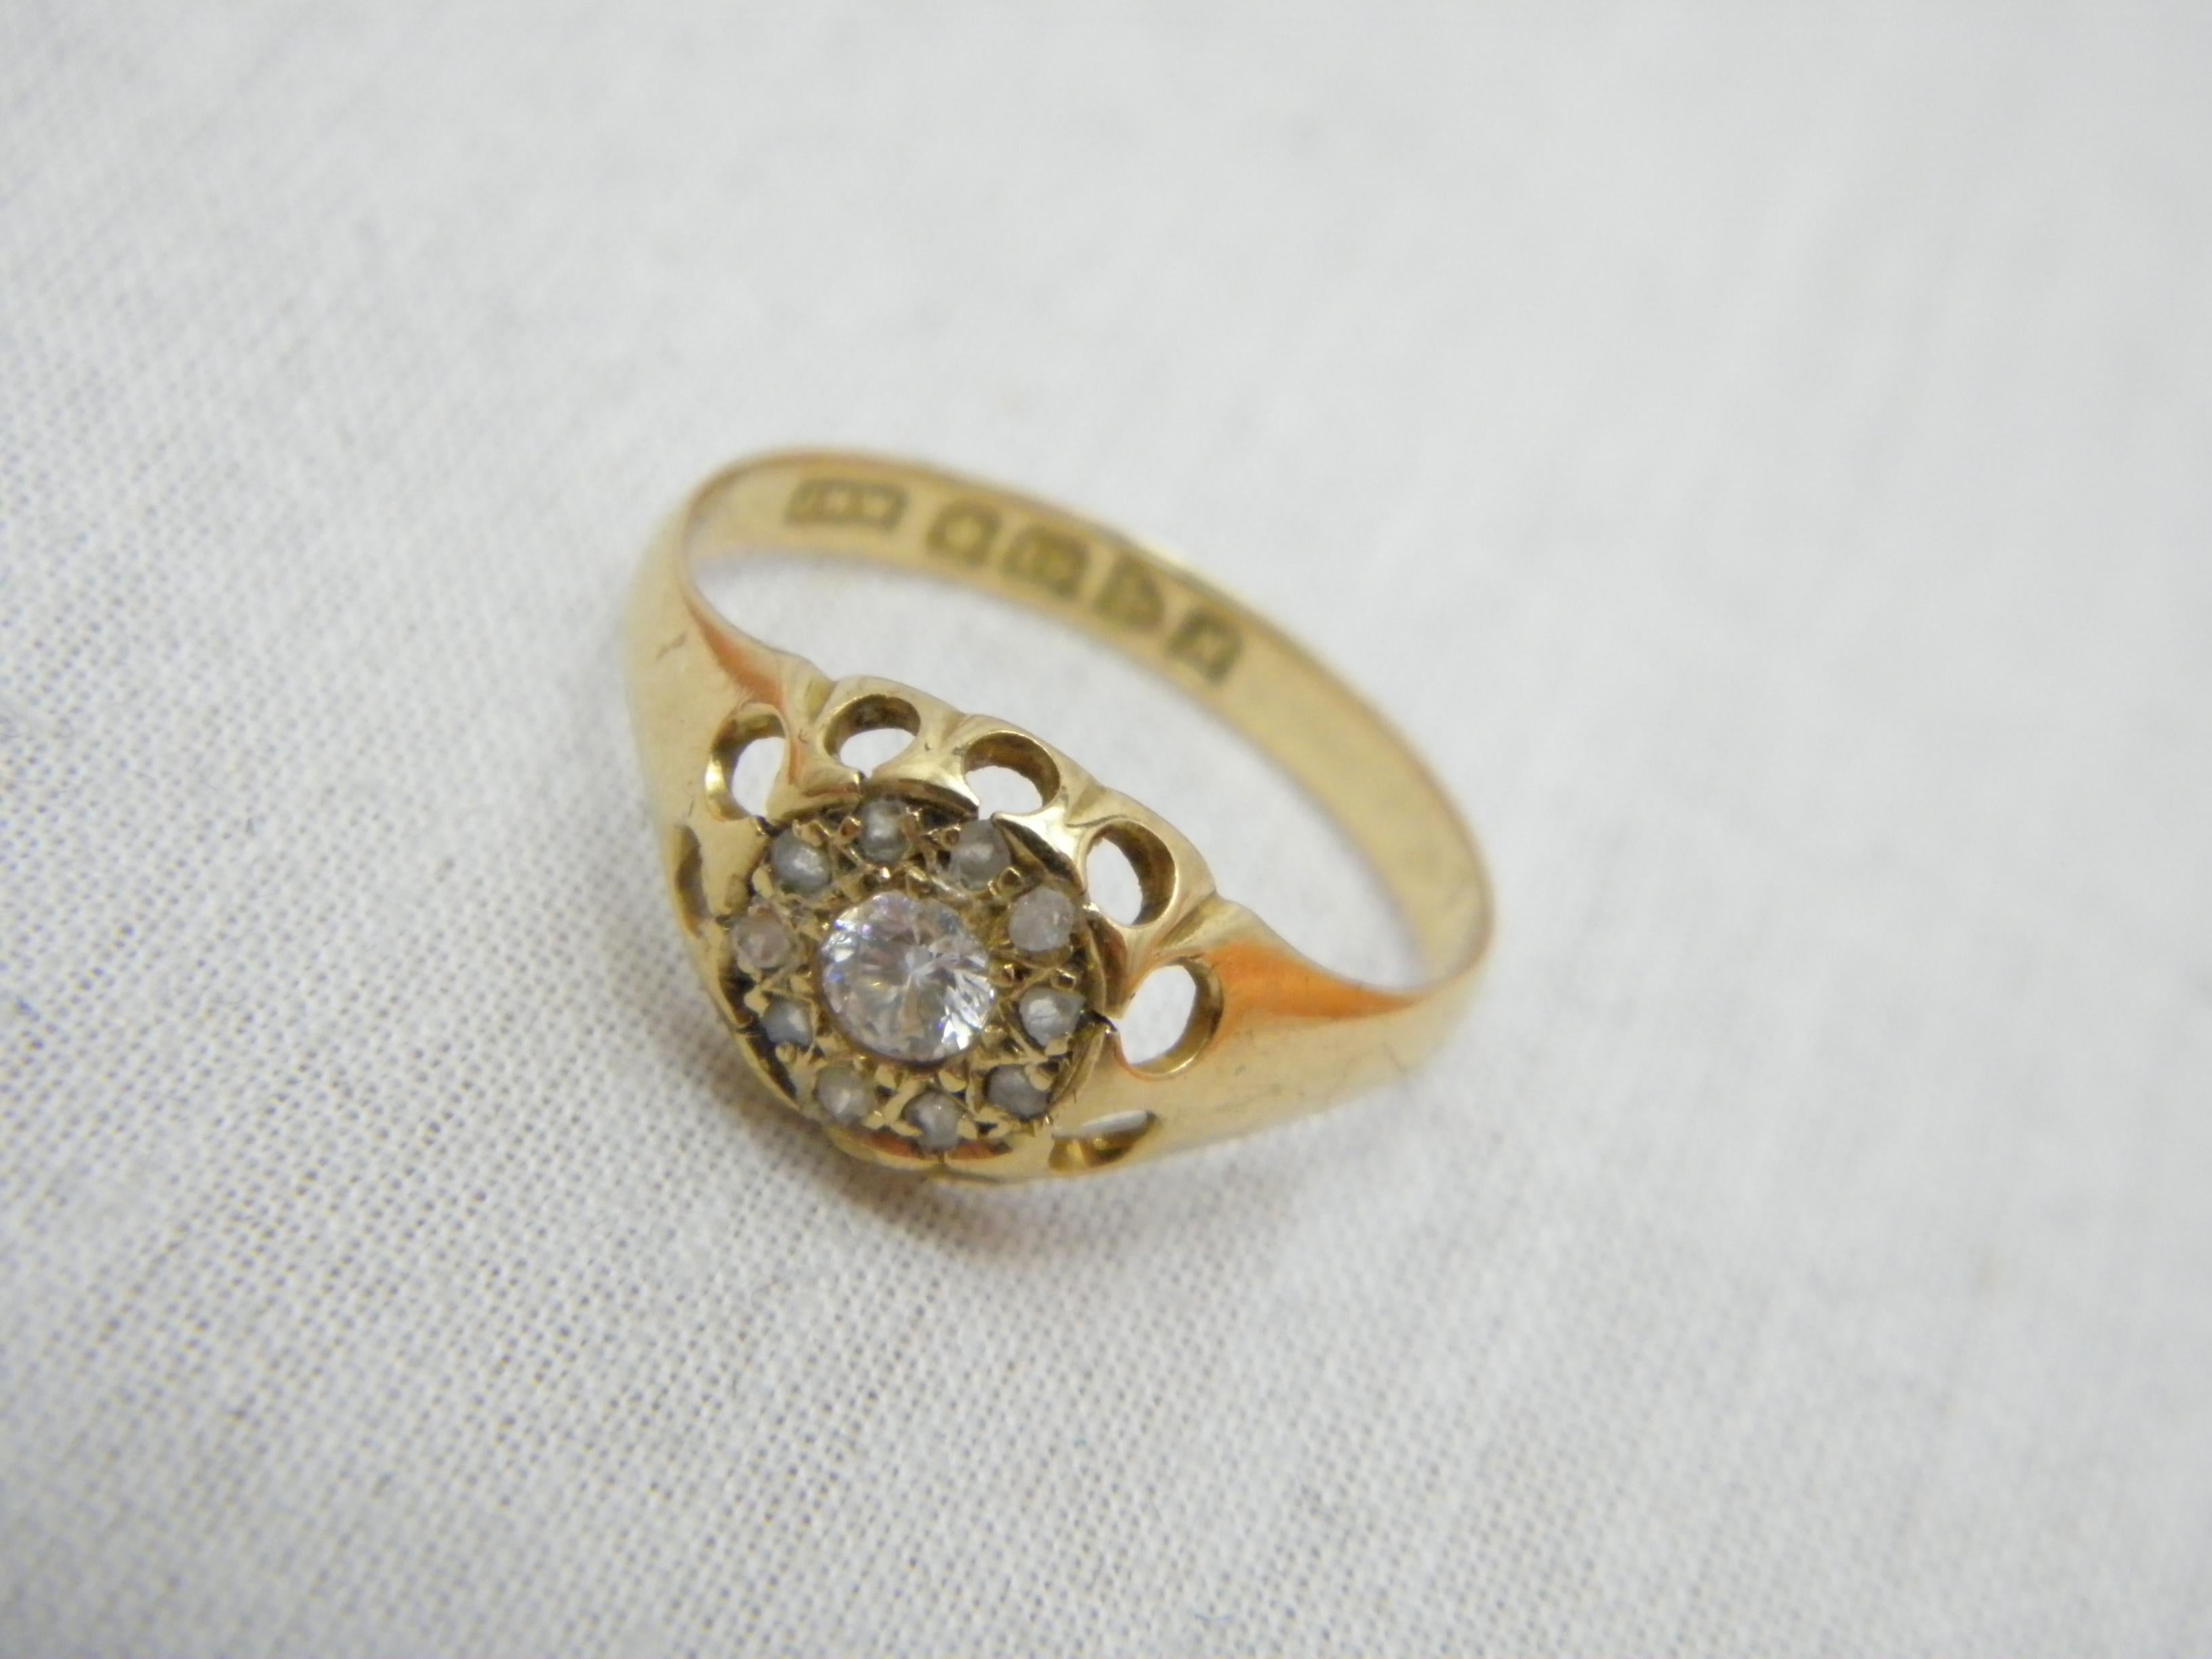 Victorian Antique 18ct Gold Diamond Halo Cluster Gypsy Ring Size N 6.75 750 Purity Chester For Sale